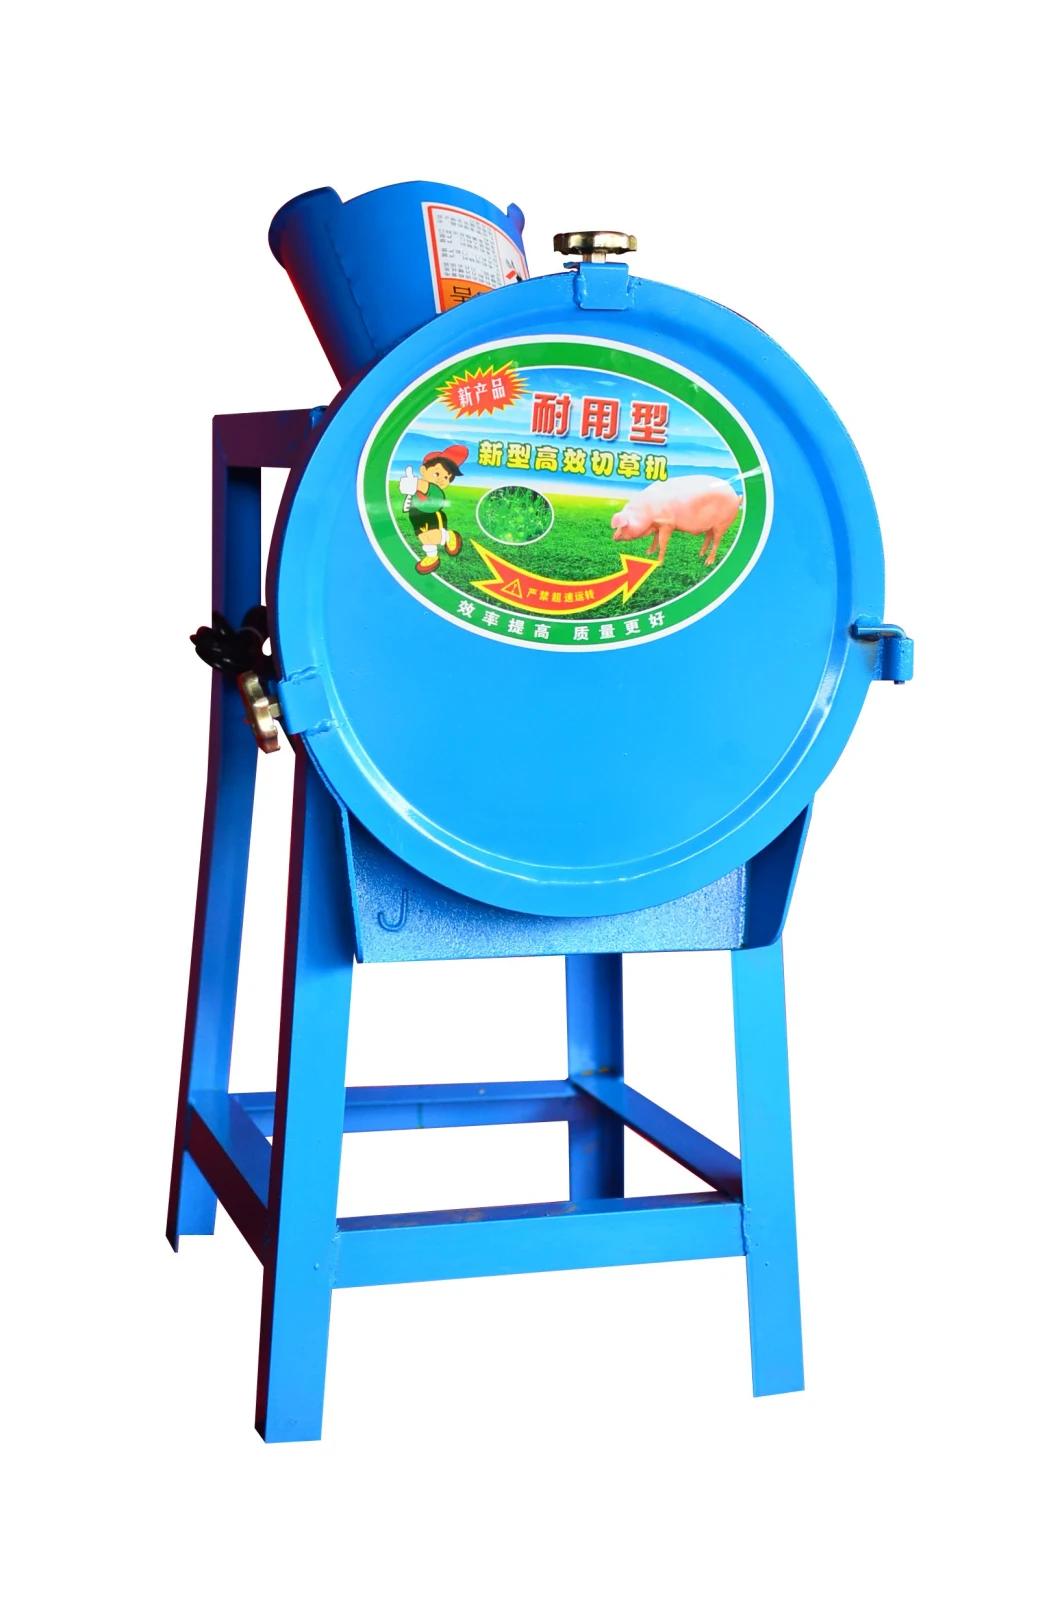 Fodder Cutter Machine for Farm Animal Feeding and Guarantee Period Is 12 Months